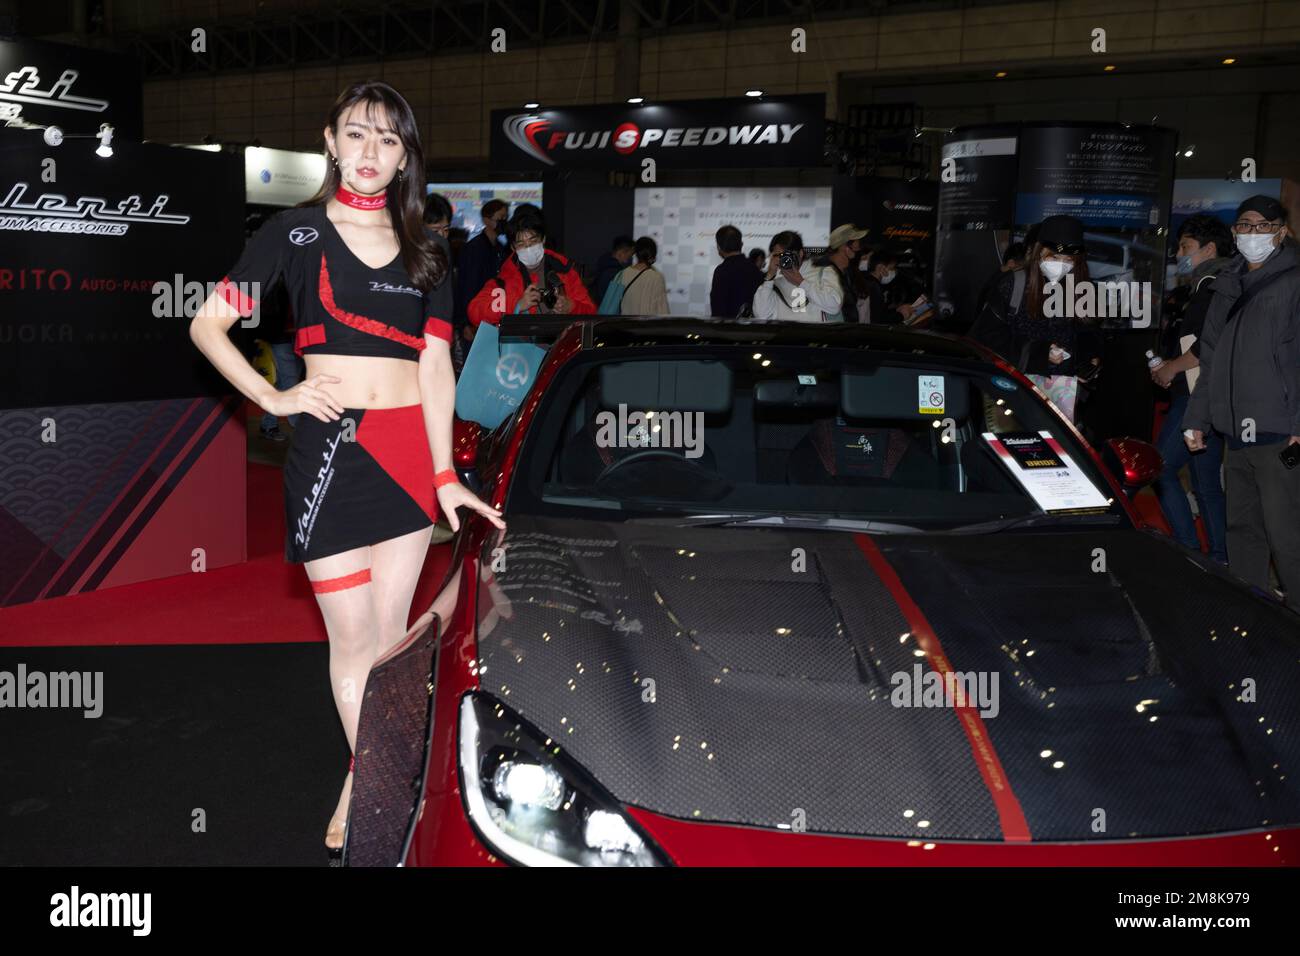 Chiba, Chiba Prefecture, Japan. 13th Jan, 2023. A model poses with a supercar.Tokyo Auto Salon (æ±äº¬ã‚ªãƒ¼ãƒˆã‚µãƒ-ãƒ³) is considered one of the most prestigious aftermarket car shows in the world, attracting car enthusiasts, manufacturers, and media from all over the globe. The show features a wide range of customized and high-performance cars, including sports cars, luxury cars, and even trucks and buses. Visitors can also expect to see car-related products and technology such as wheels, tires, audio systems, and car electronics. Some of the most notable manufacturers that participate Stock Photo